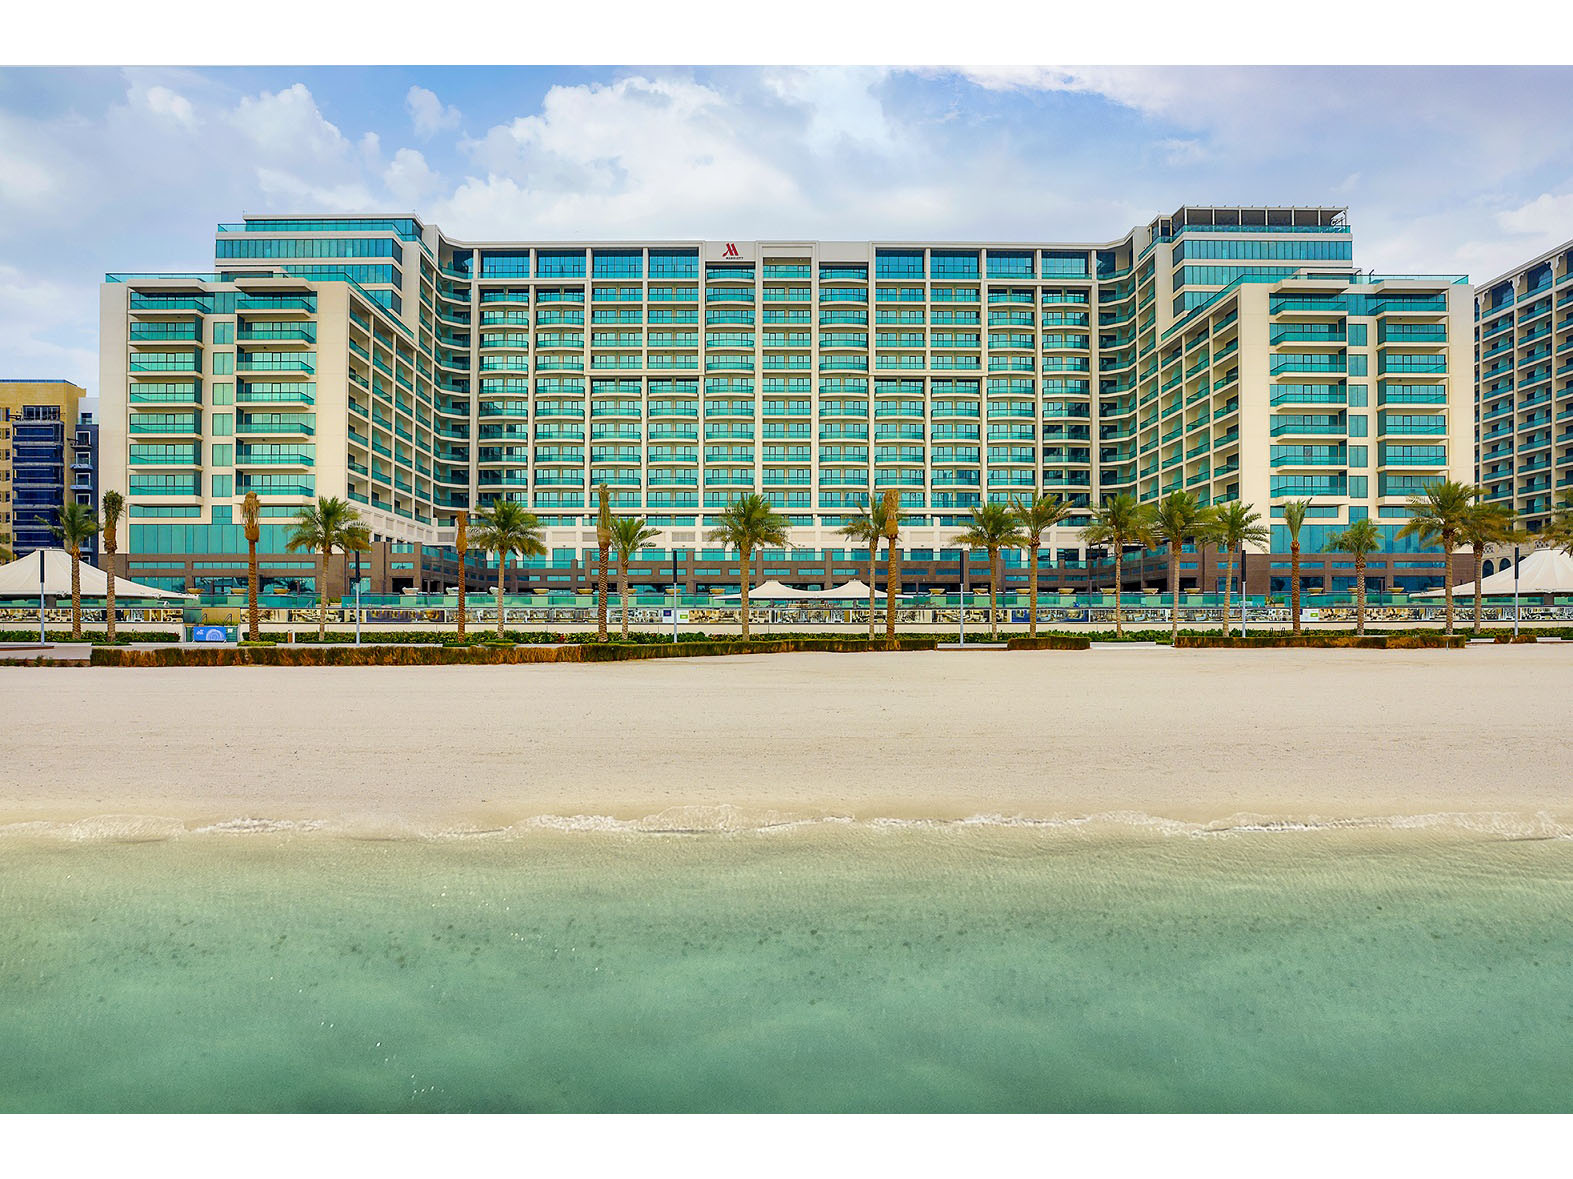 Marriott International set to expand its Middle East footprint